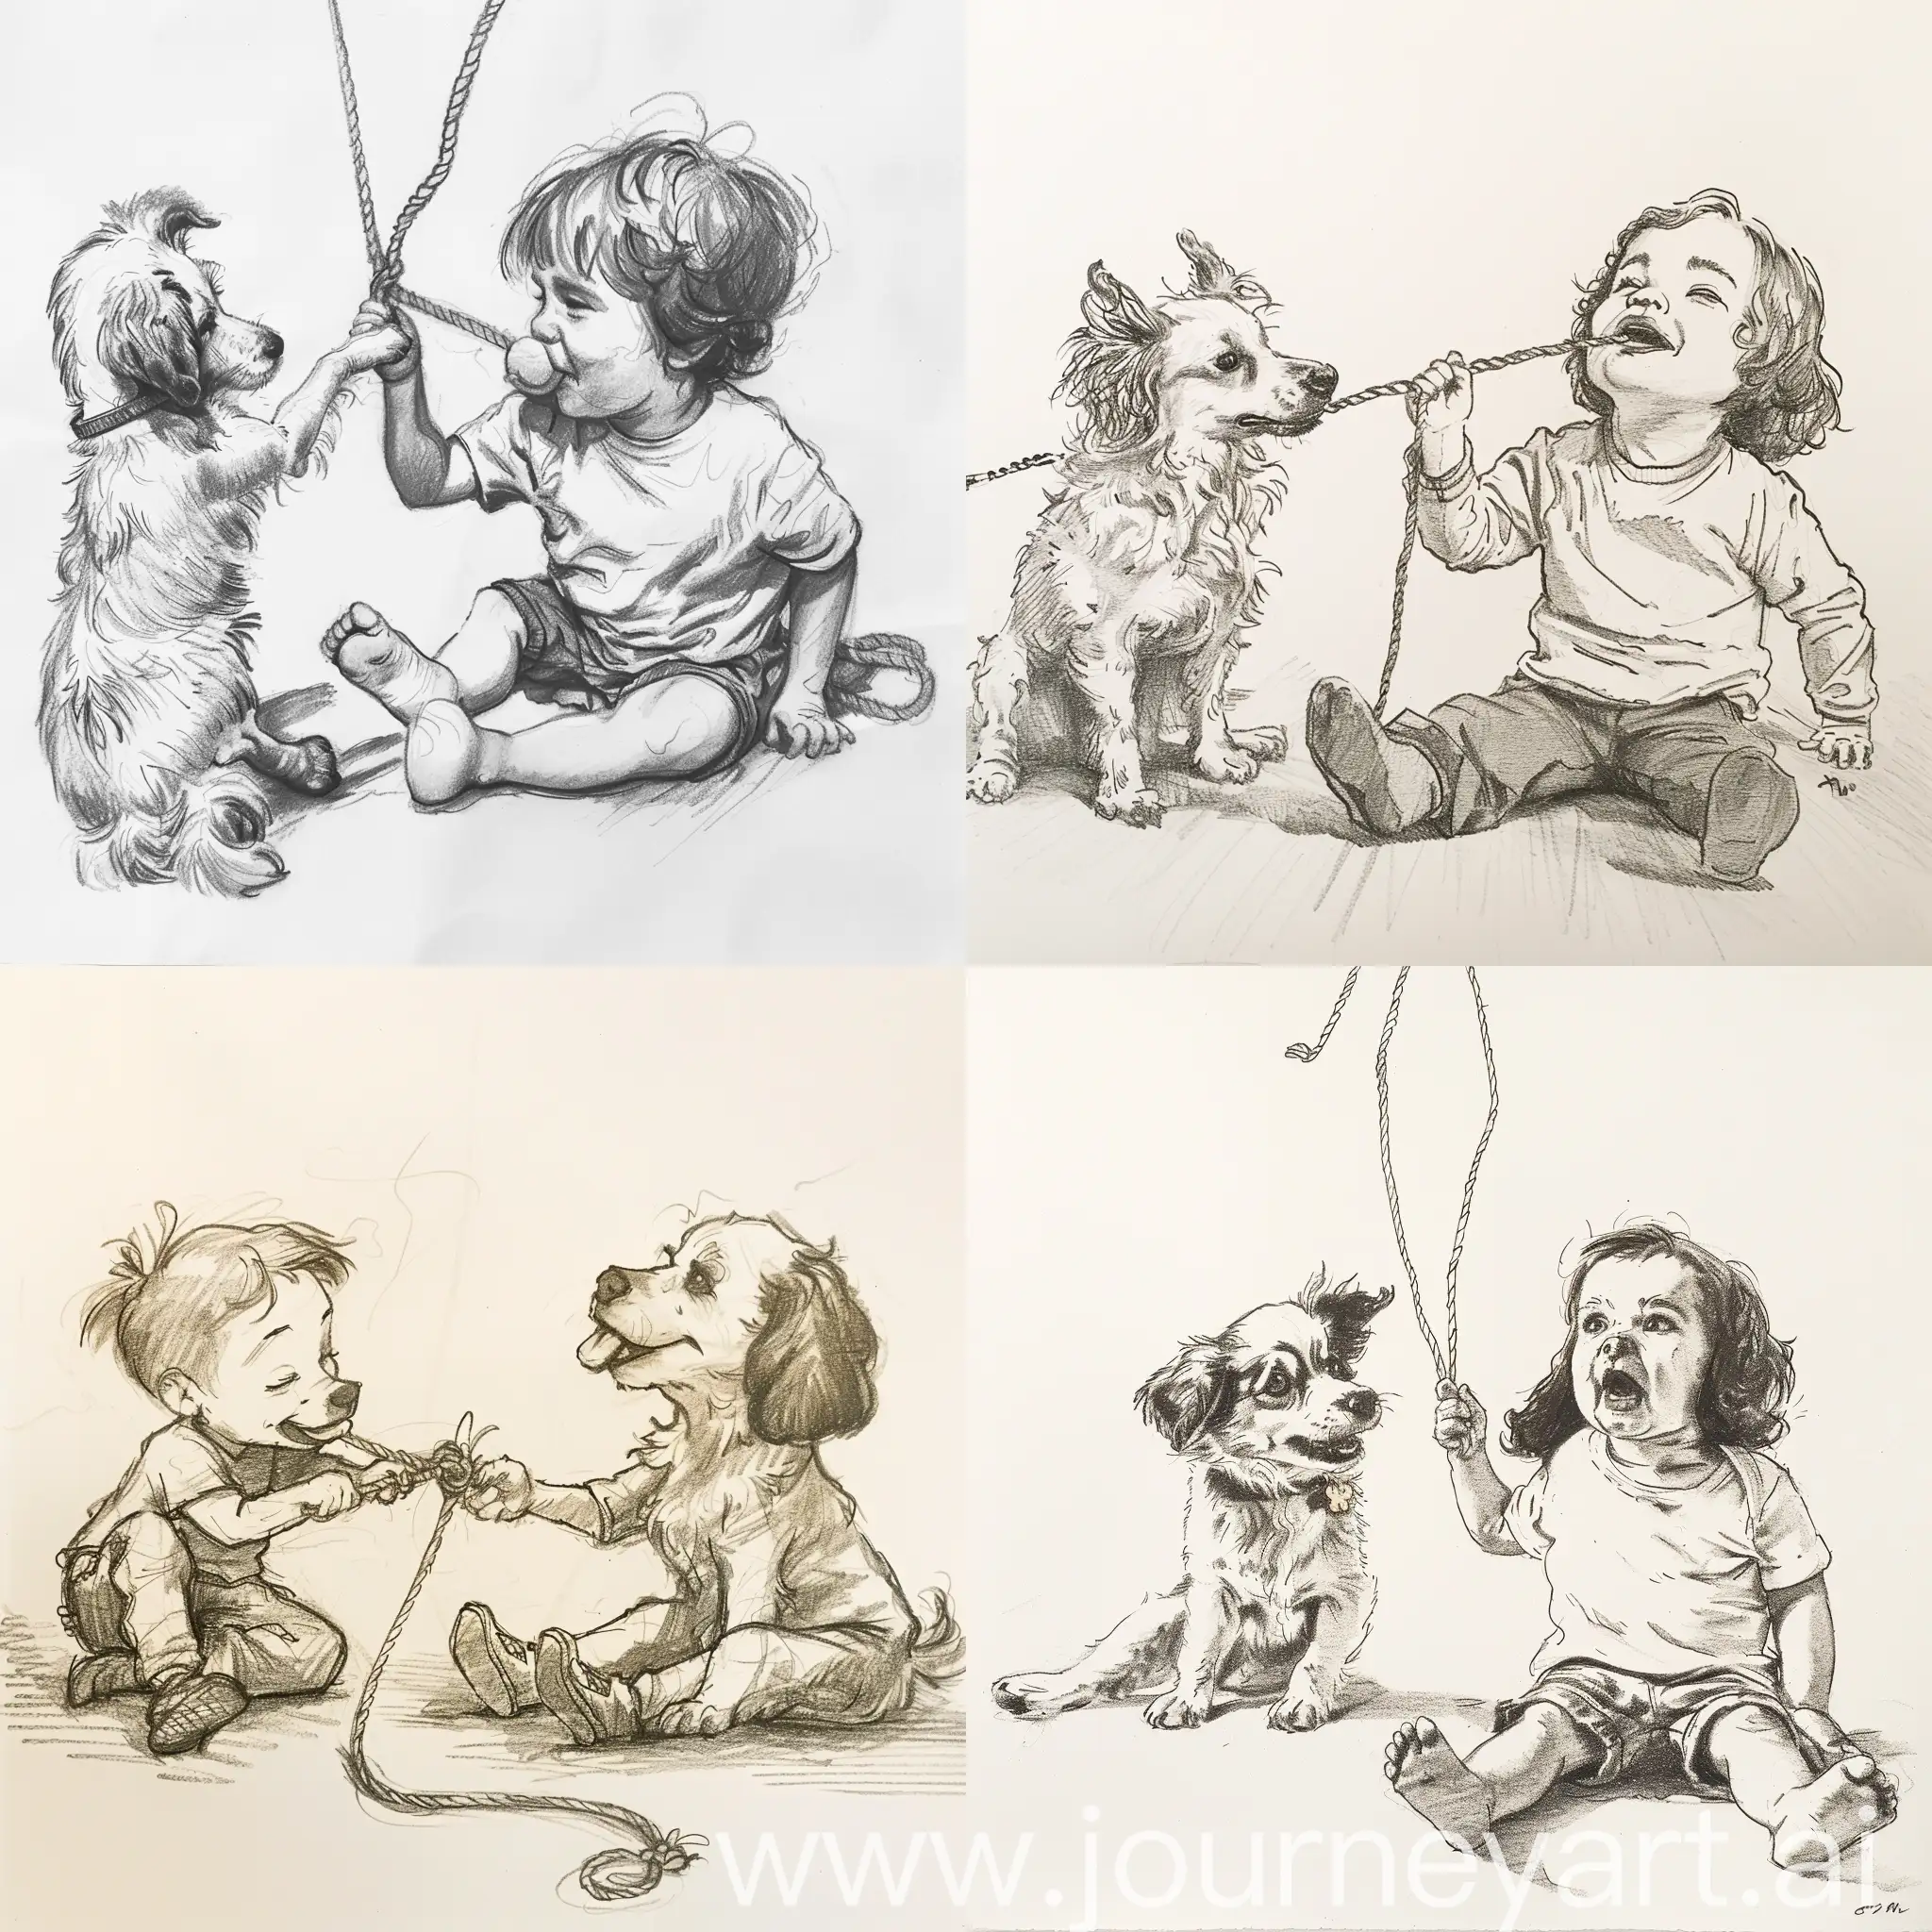   drowing of a child sitting on the floor with a cavlier spanel likking the childs  right cheak while the childs playing tug of war with a sheltie dog by his laft hand